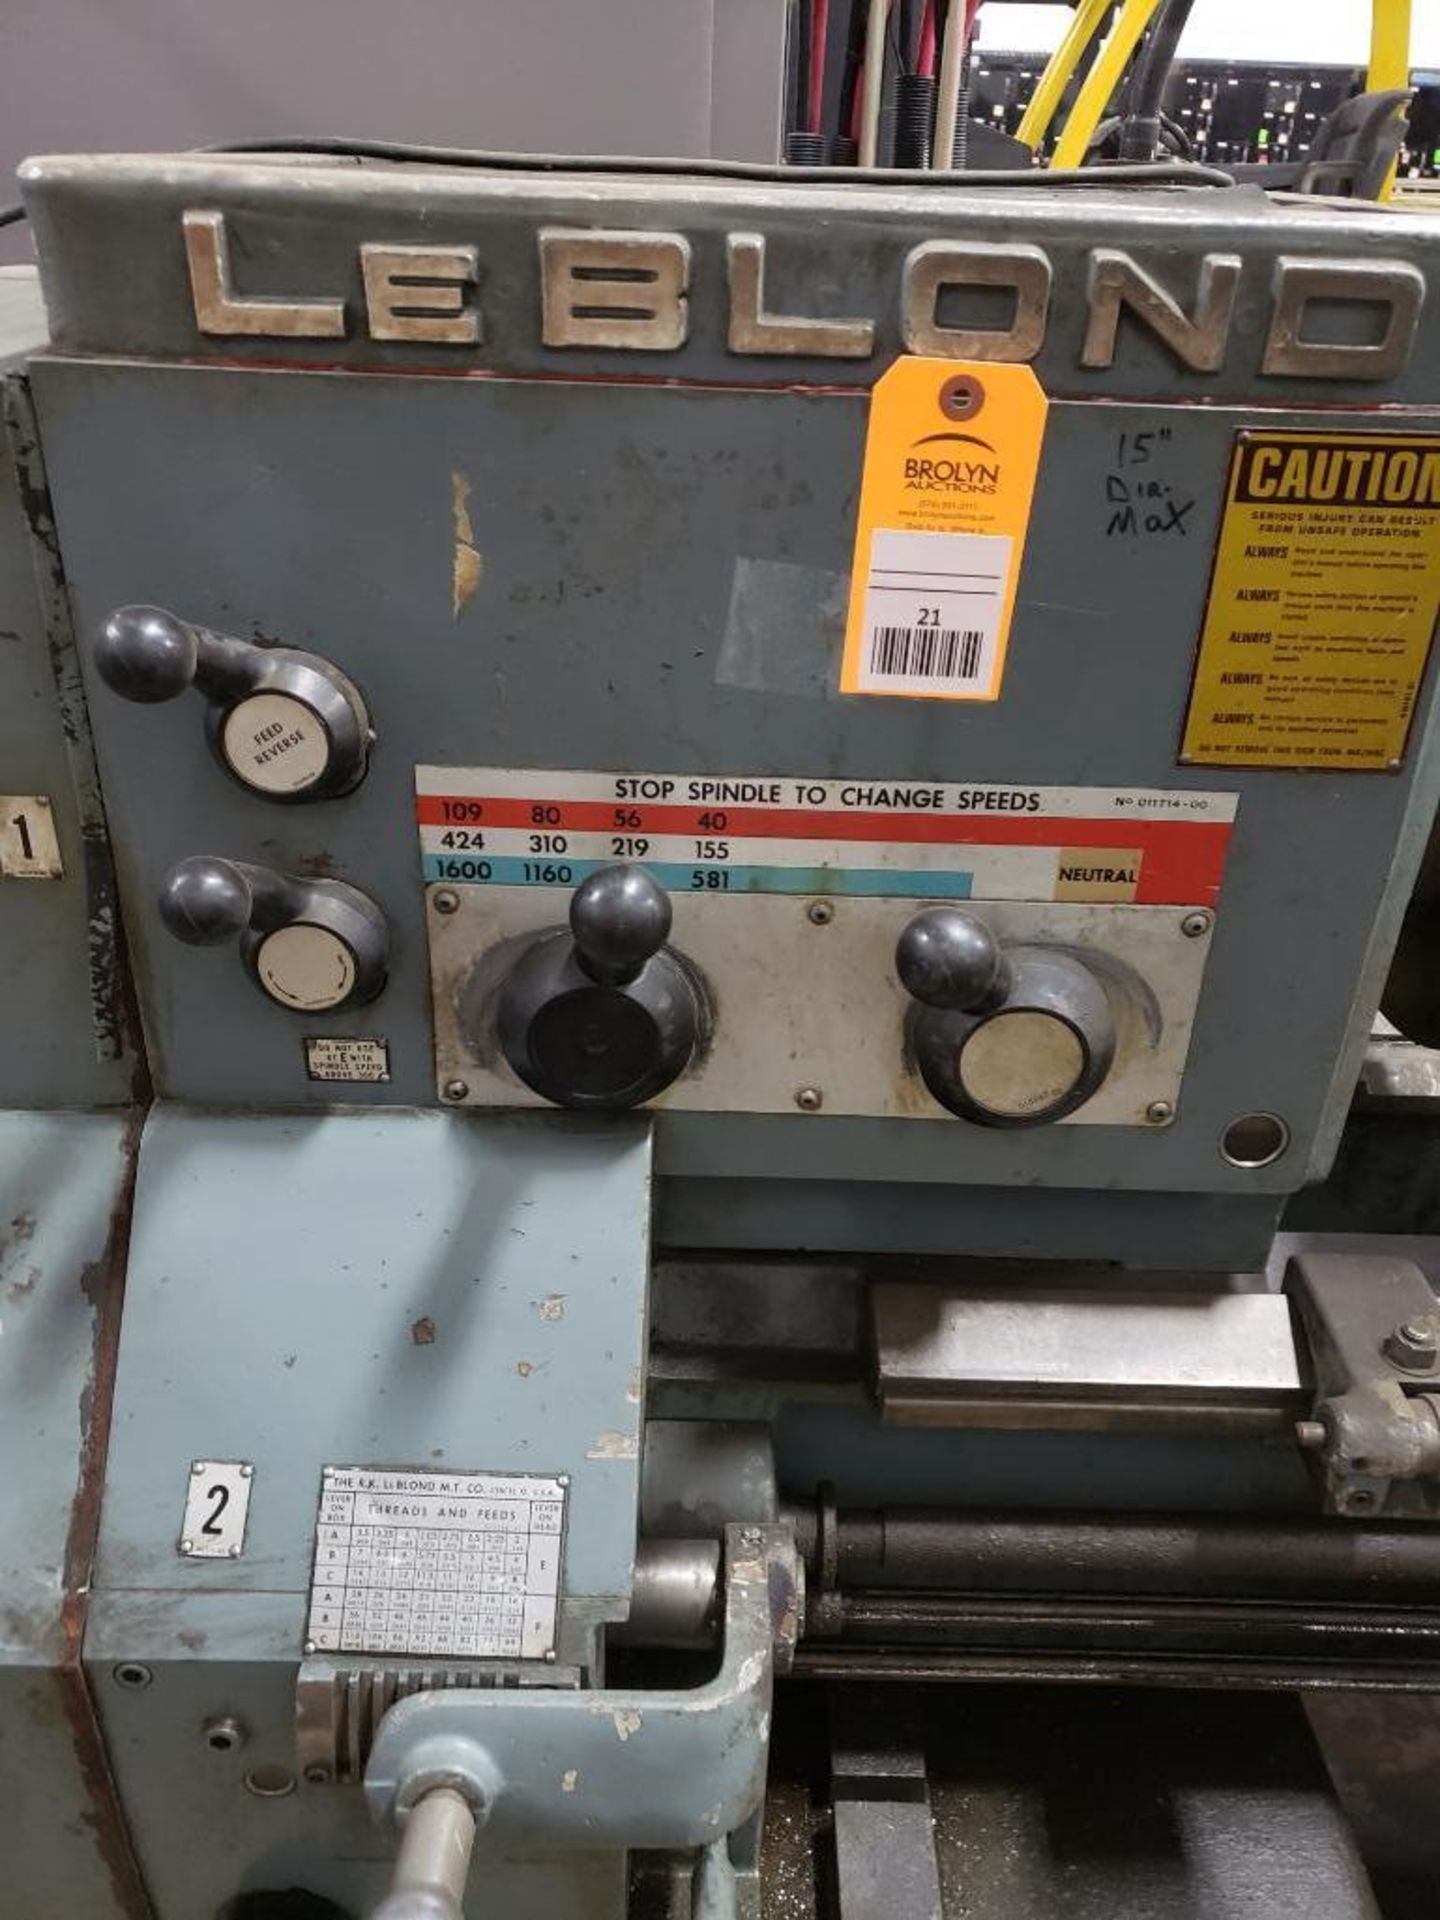 Leblond 15" lathe. Appears to be 96", measured from chuck face to end of bed. - Image 3 of 6